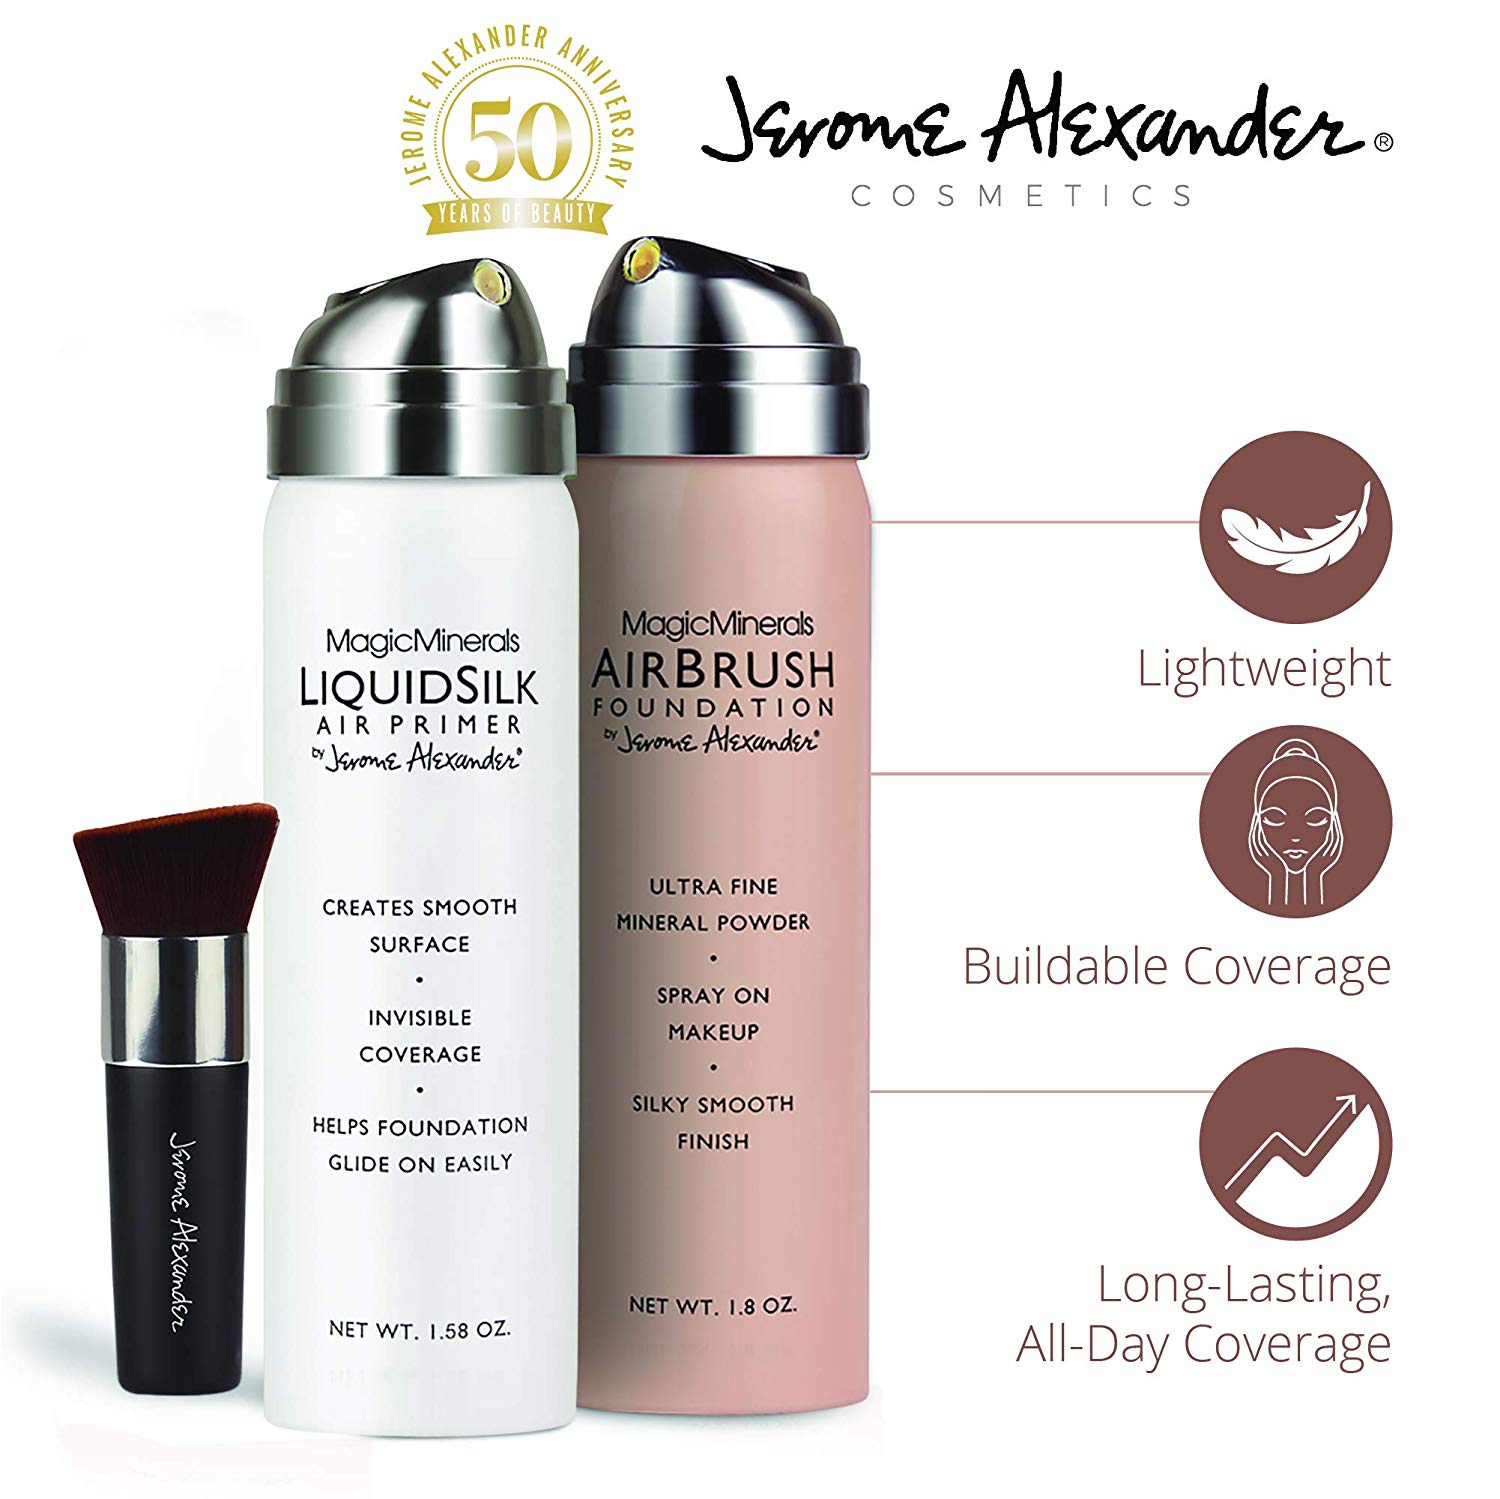 Review of Jerome Alexander Airbrush Foundation (3 Piece Set, Light)